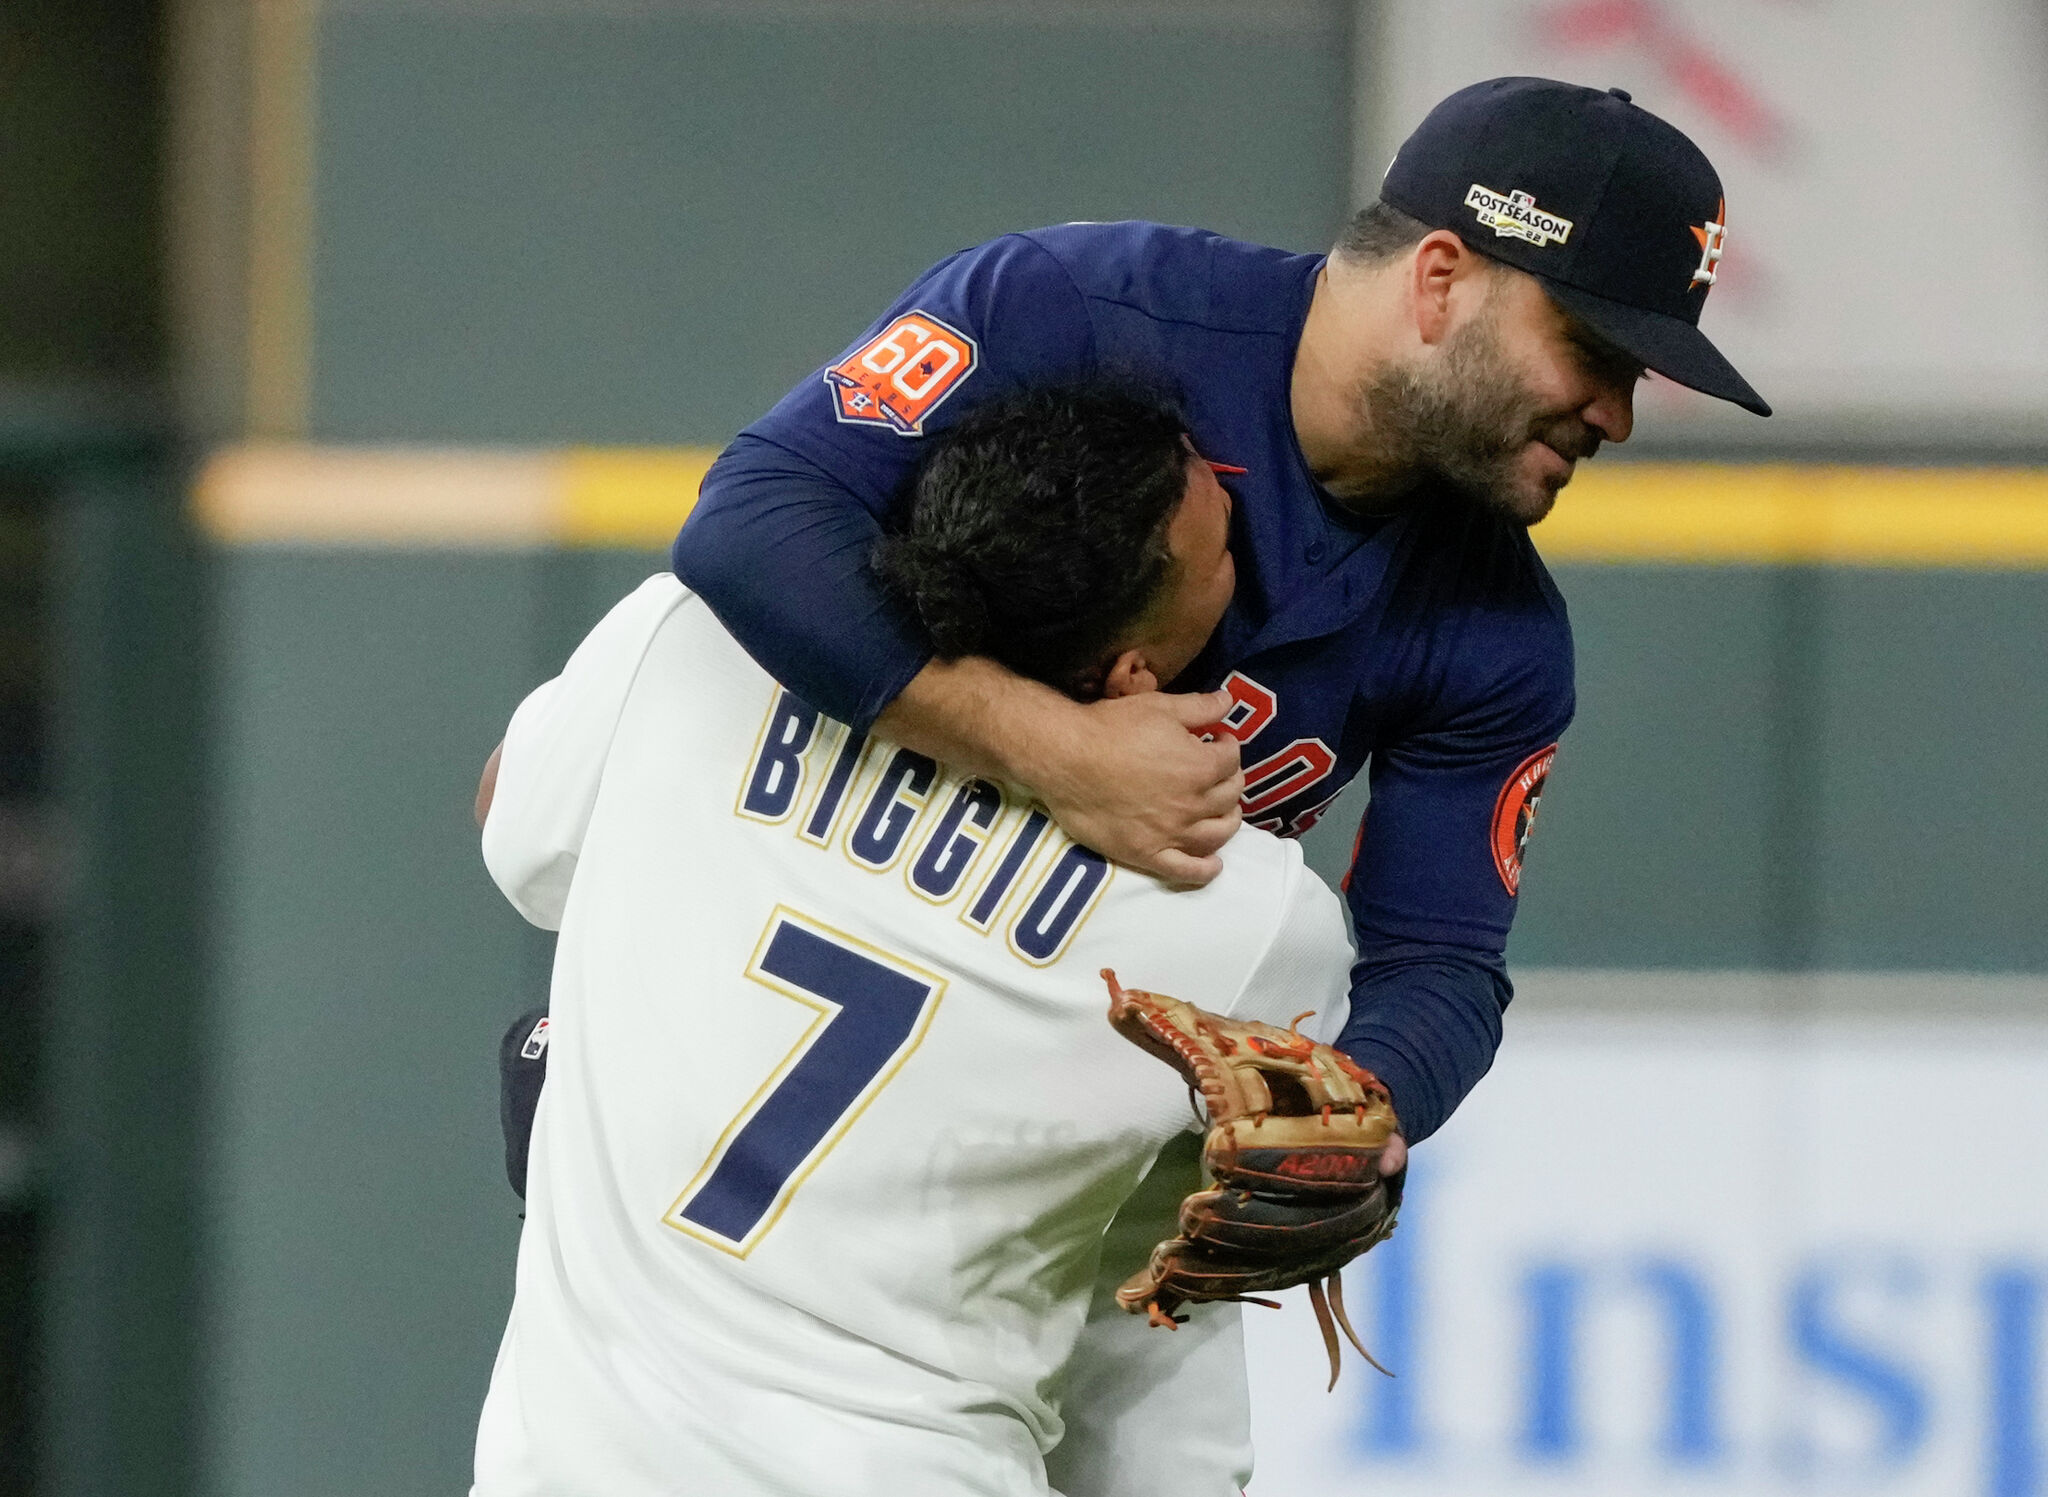 Jose Altuve's home broken into on Astros' opening day, 4 accused